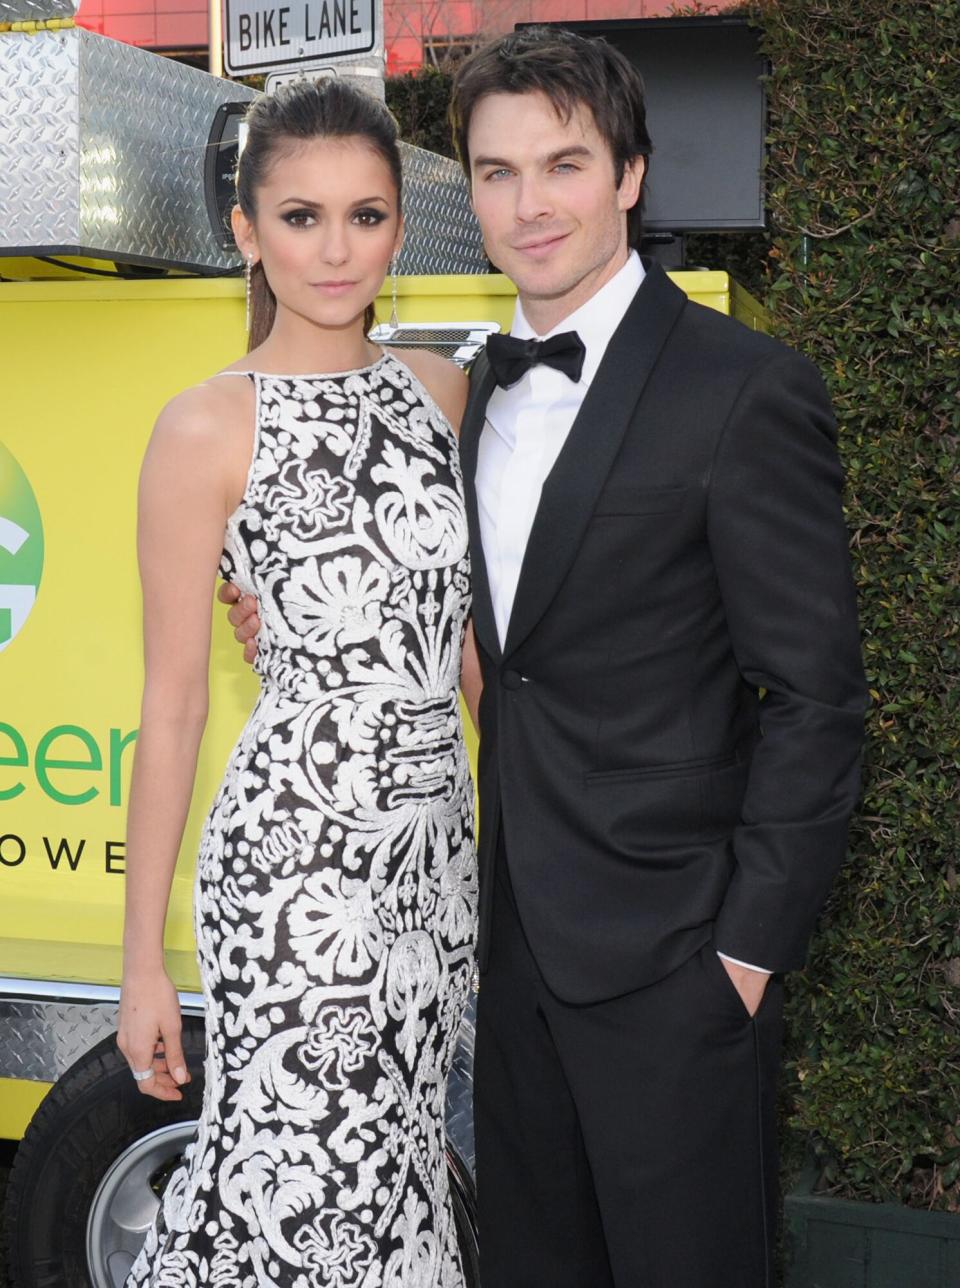 Nina Dobrev and Ian Somerhalder attend the 21st Annual Elton John AIDS Foundation Academy Awards Viewing Party at West Hollywood Park on February 24, 2013 in West Hollywood, California